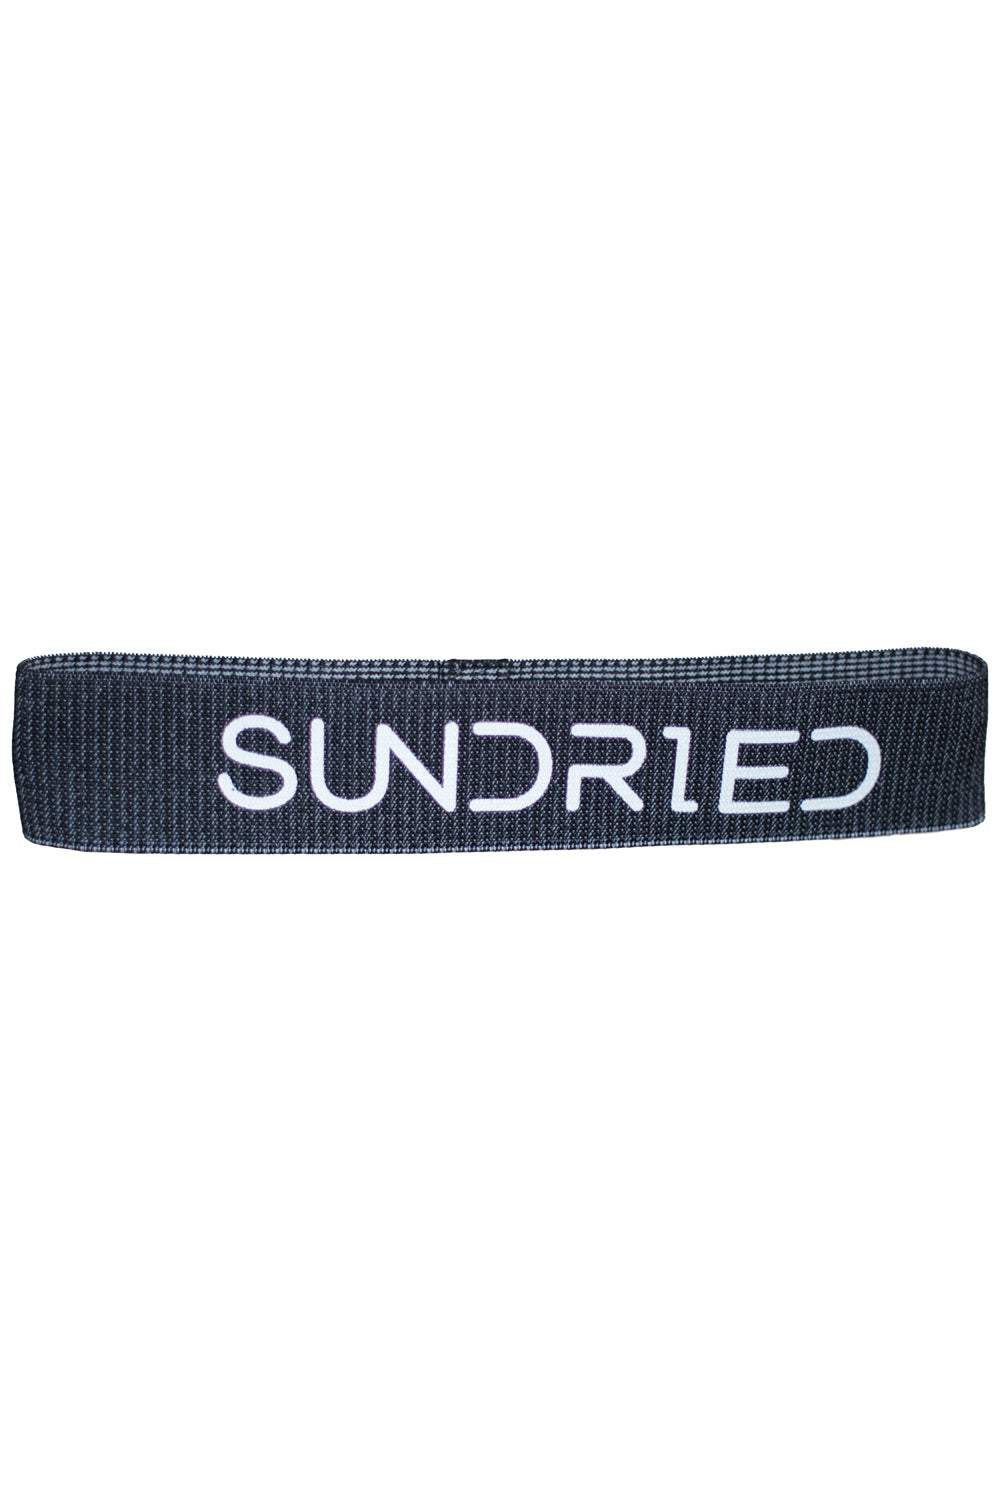 Sundried Stretch Fabric Non-Slip Resistance Band For Home Workouts Gym Training 